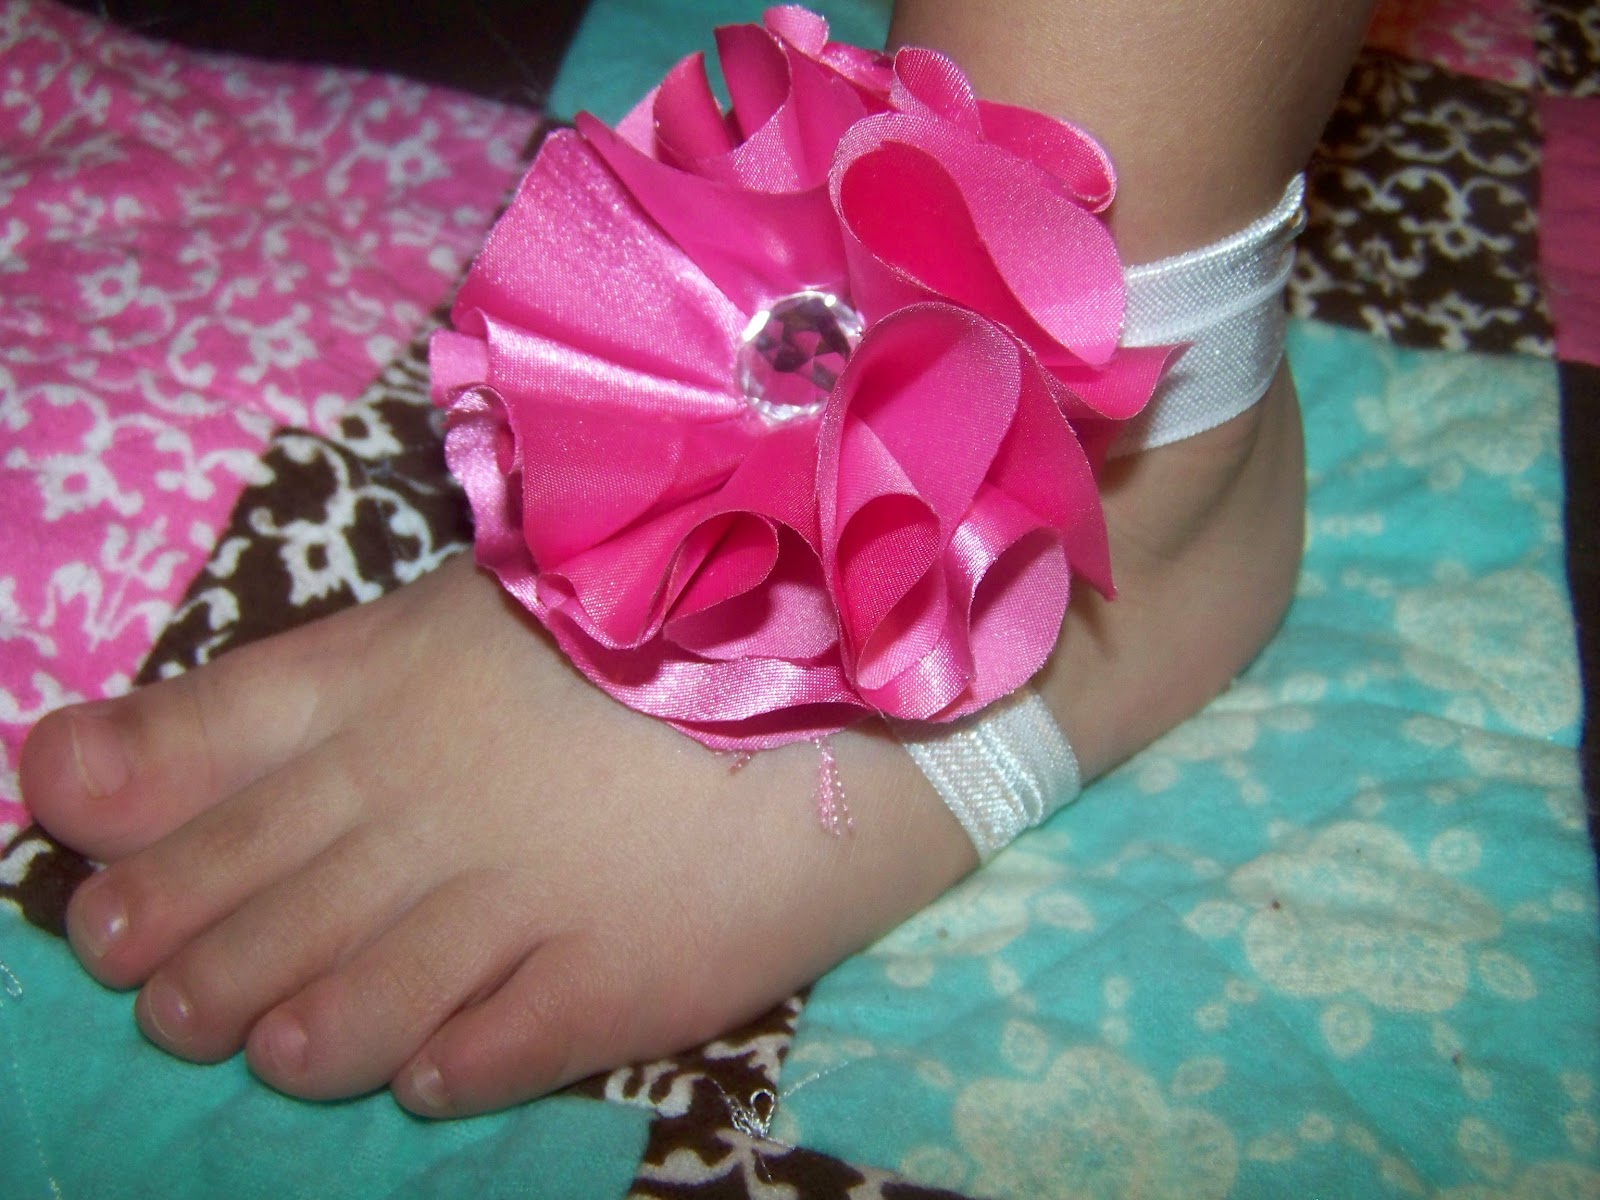 ... of Handmade: Simple-Sew Barefoot Sandals and Flower Tutorial